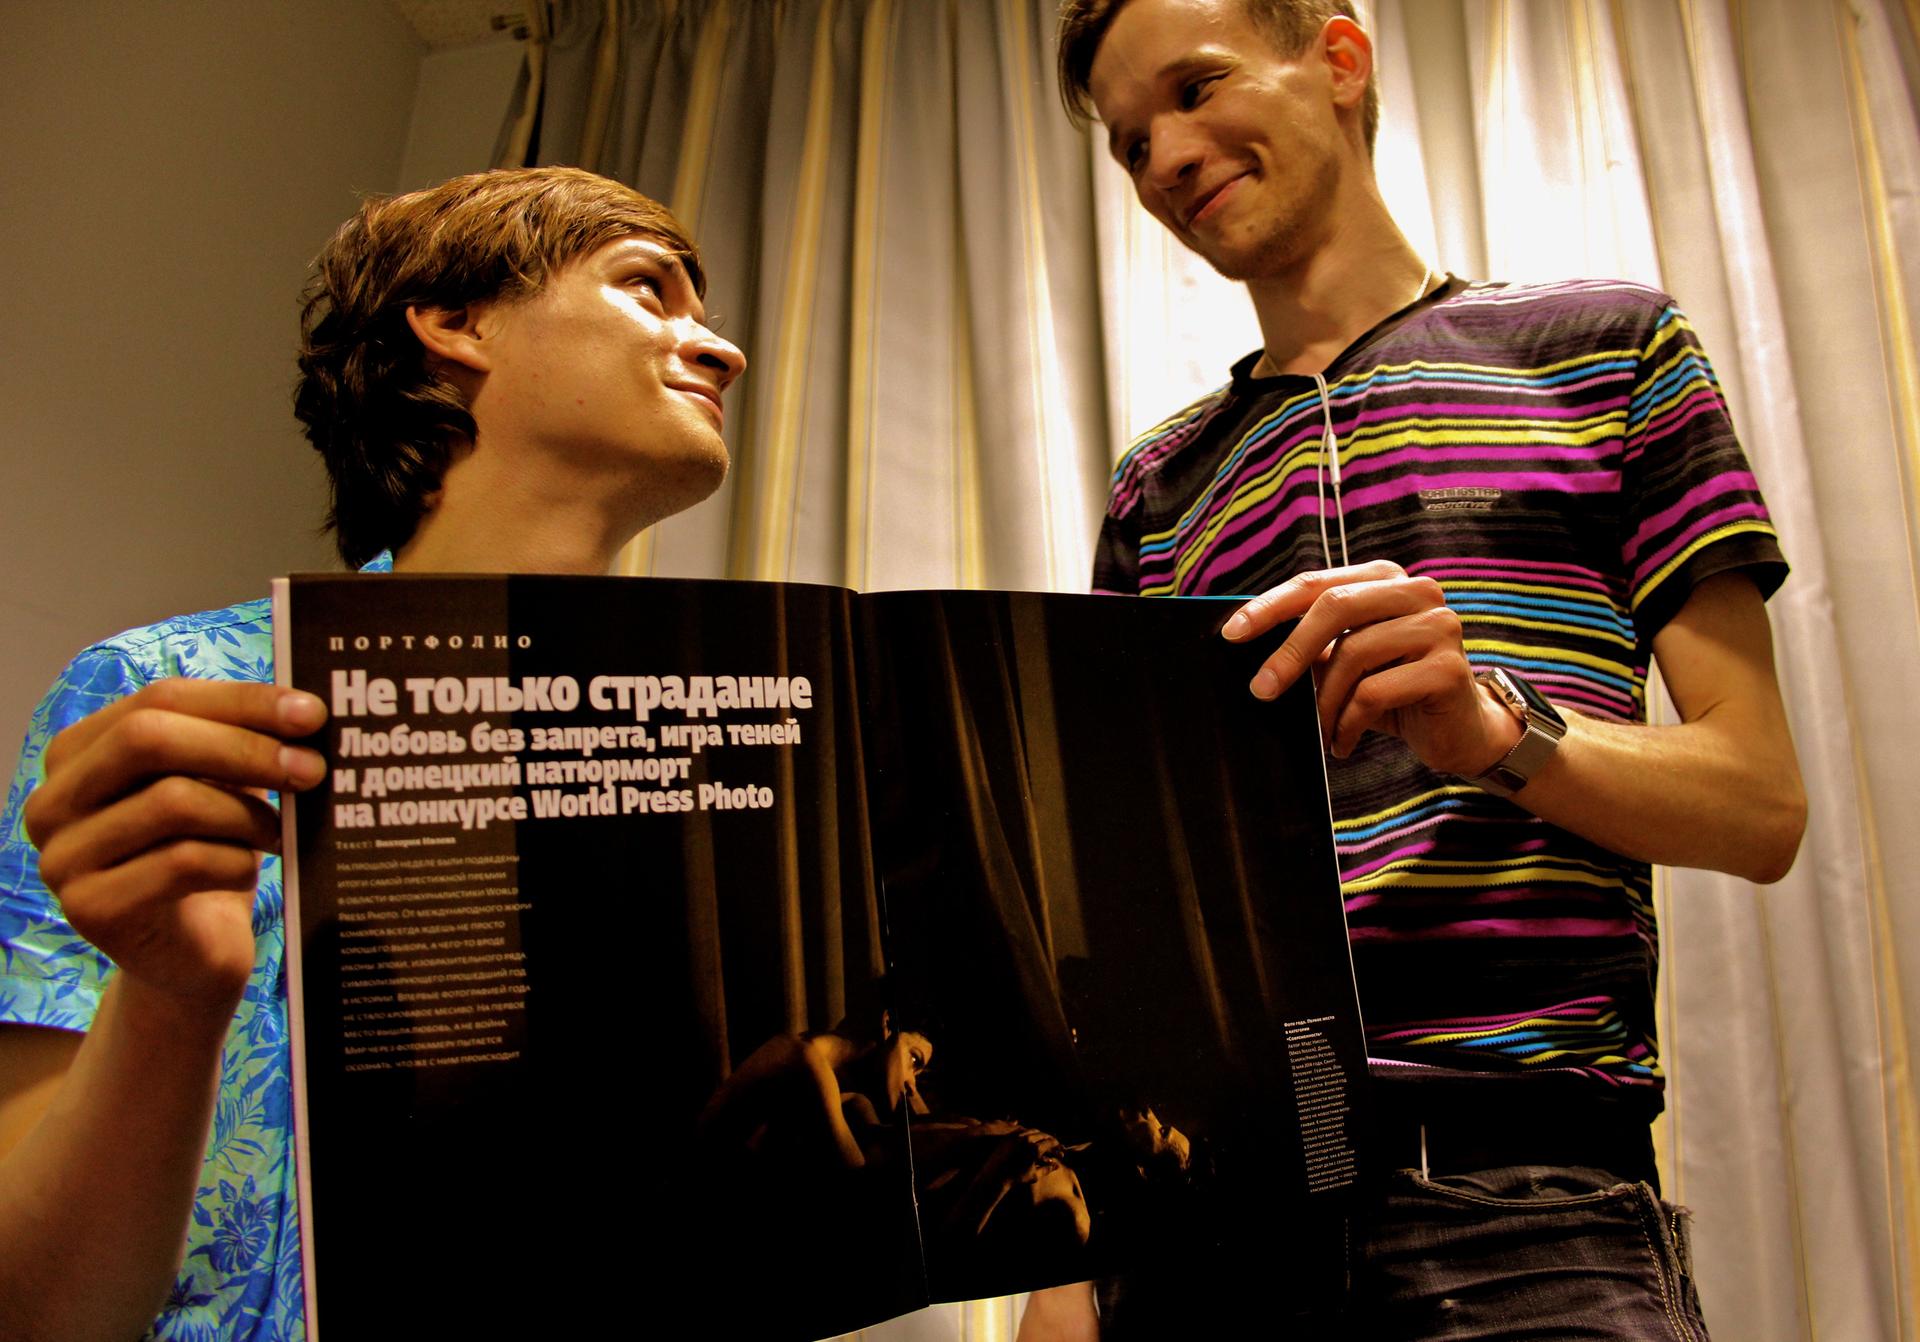 Jon and Alex (r) in St. Petersburg with the award-winning photo.